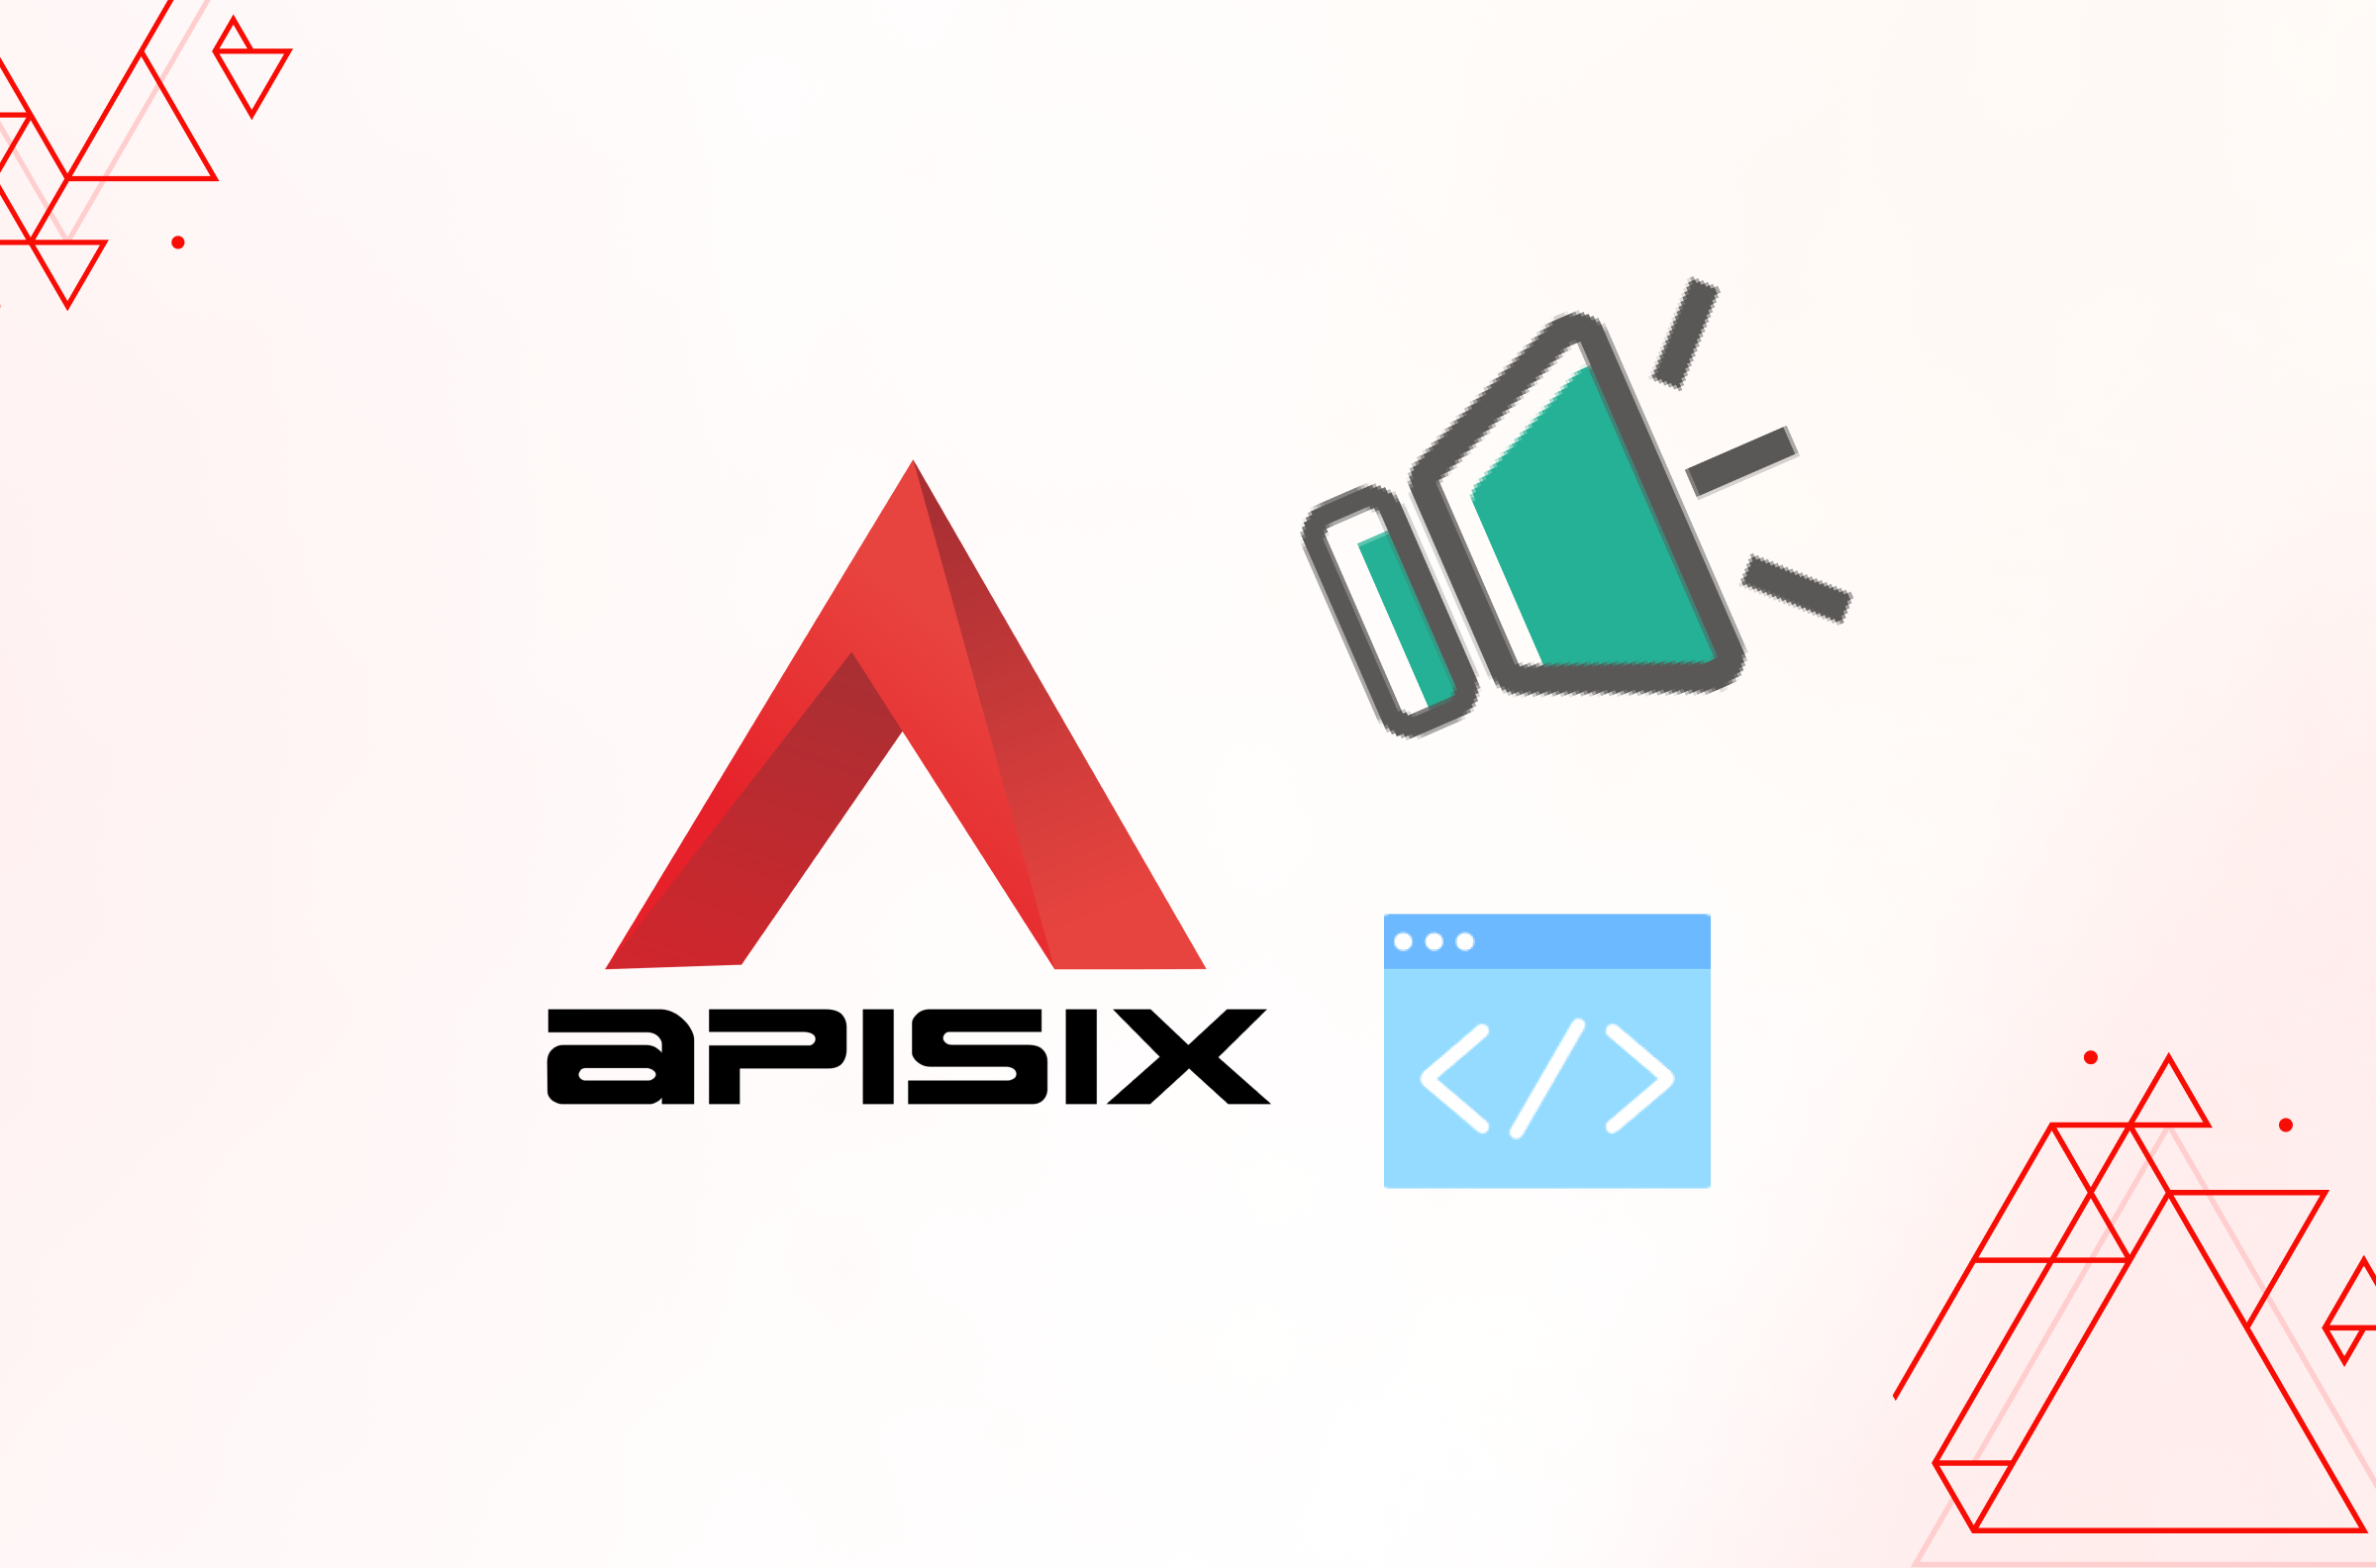 22 Countries and Counting: Getting People Excited about Apache APISIX